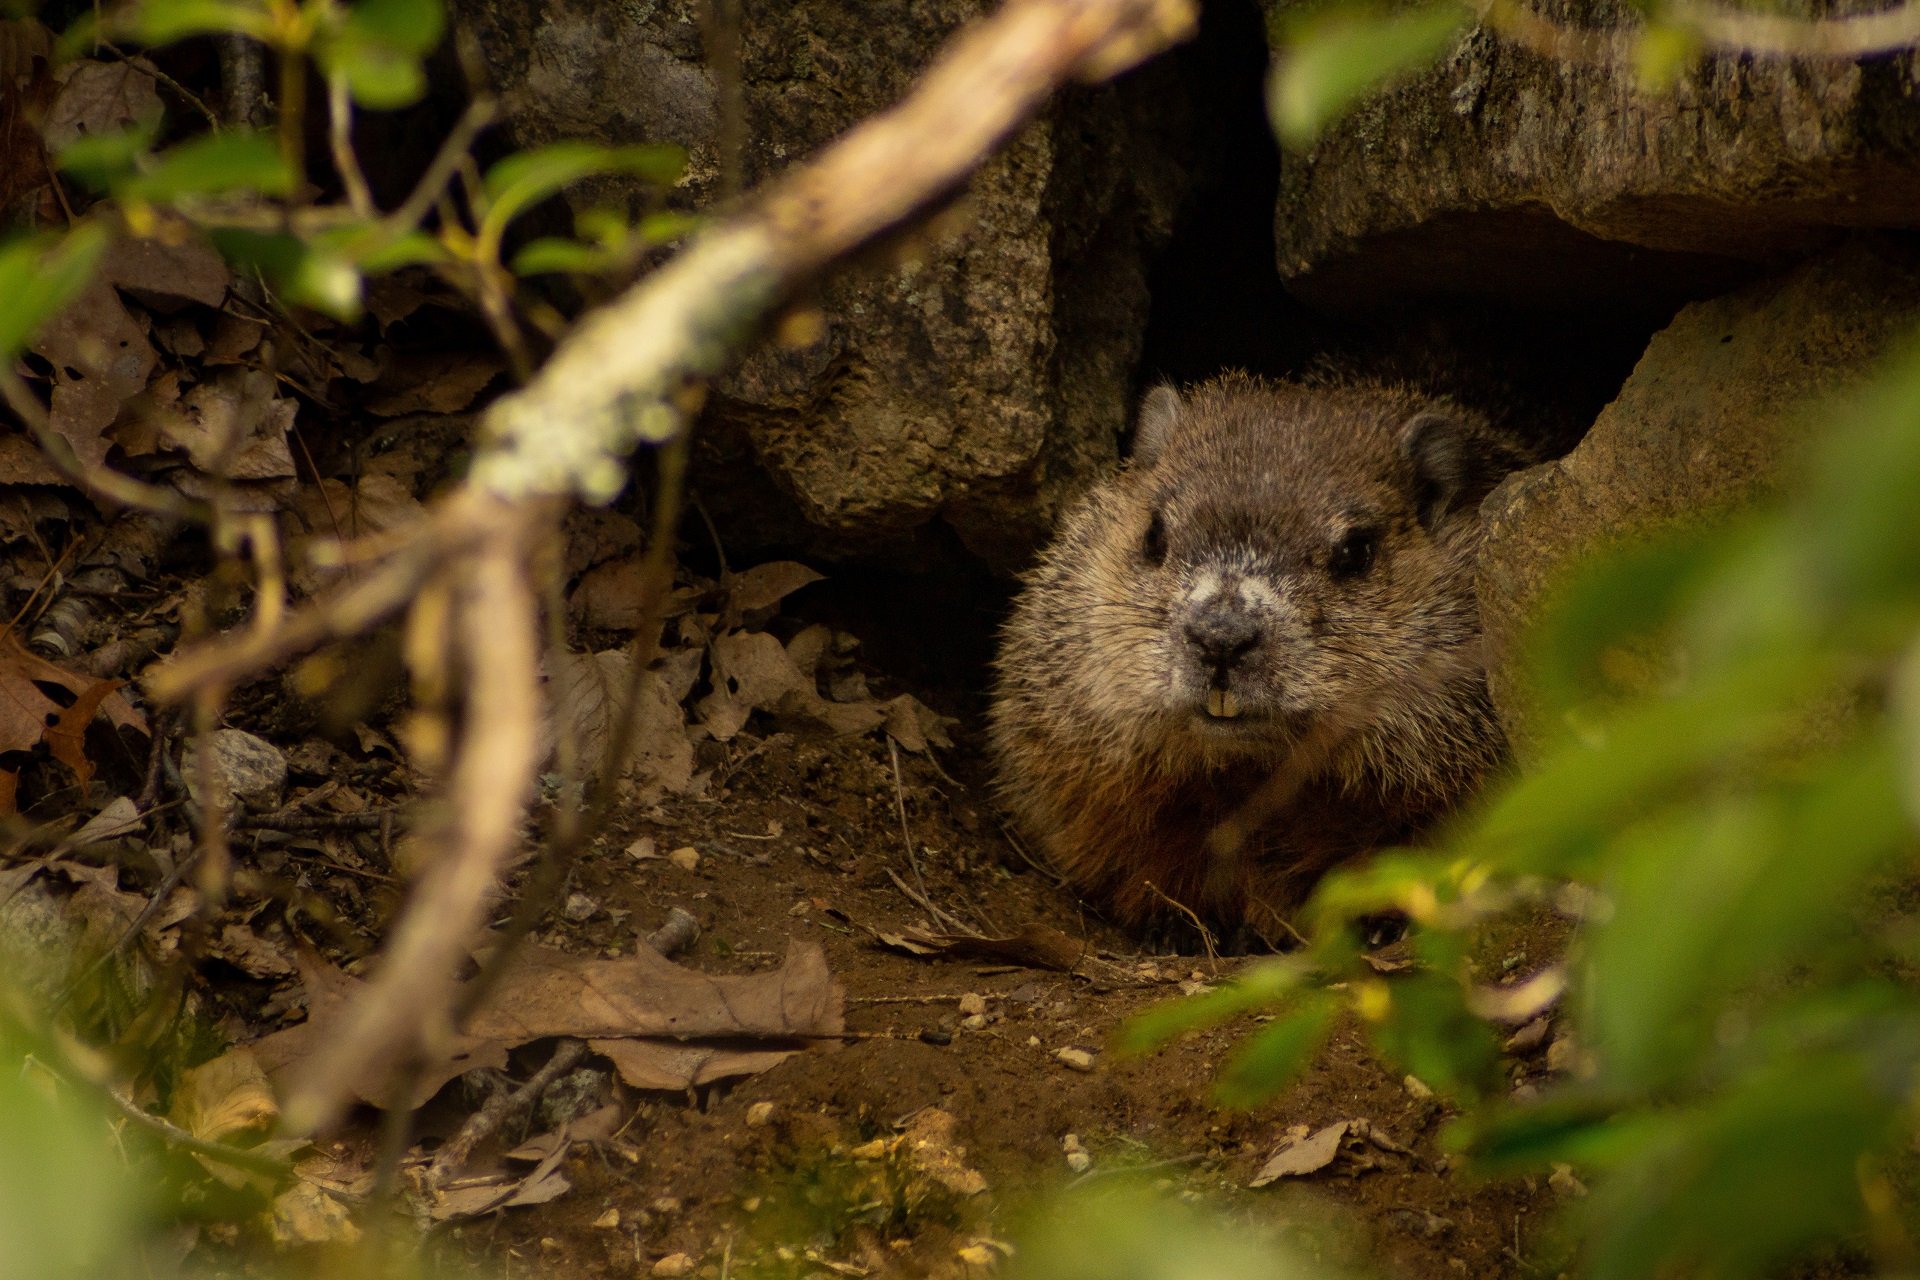 A groundhog (woodchuck) huddles between rocks in a woodsy area.